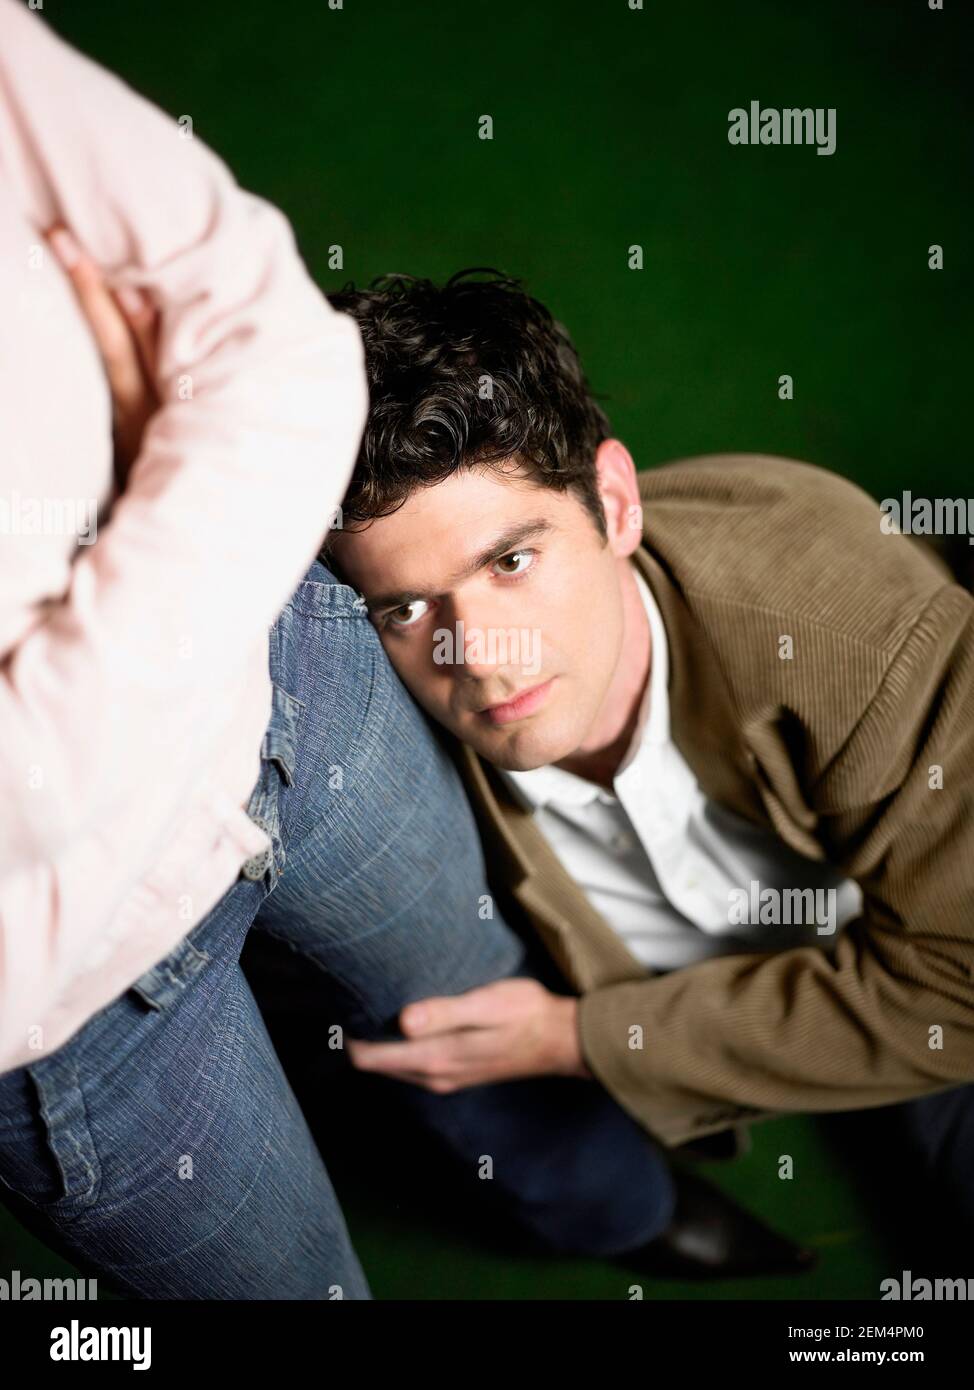 High angle view of a young man holding a woman's leg Stock Photo